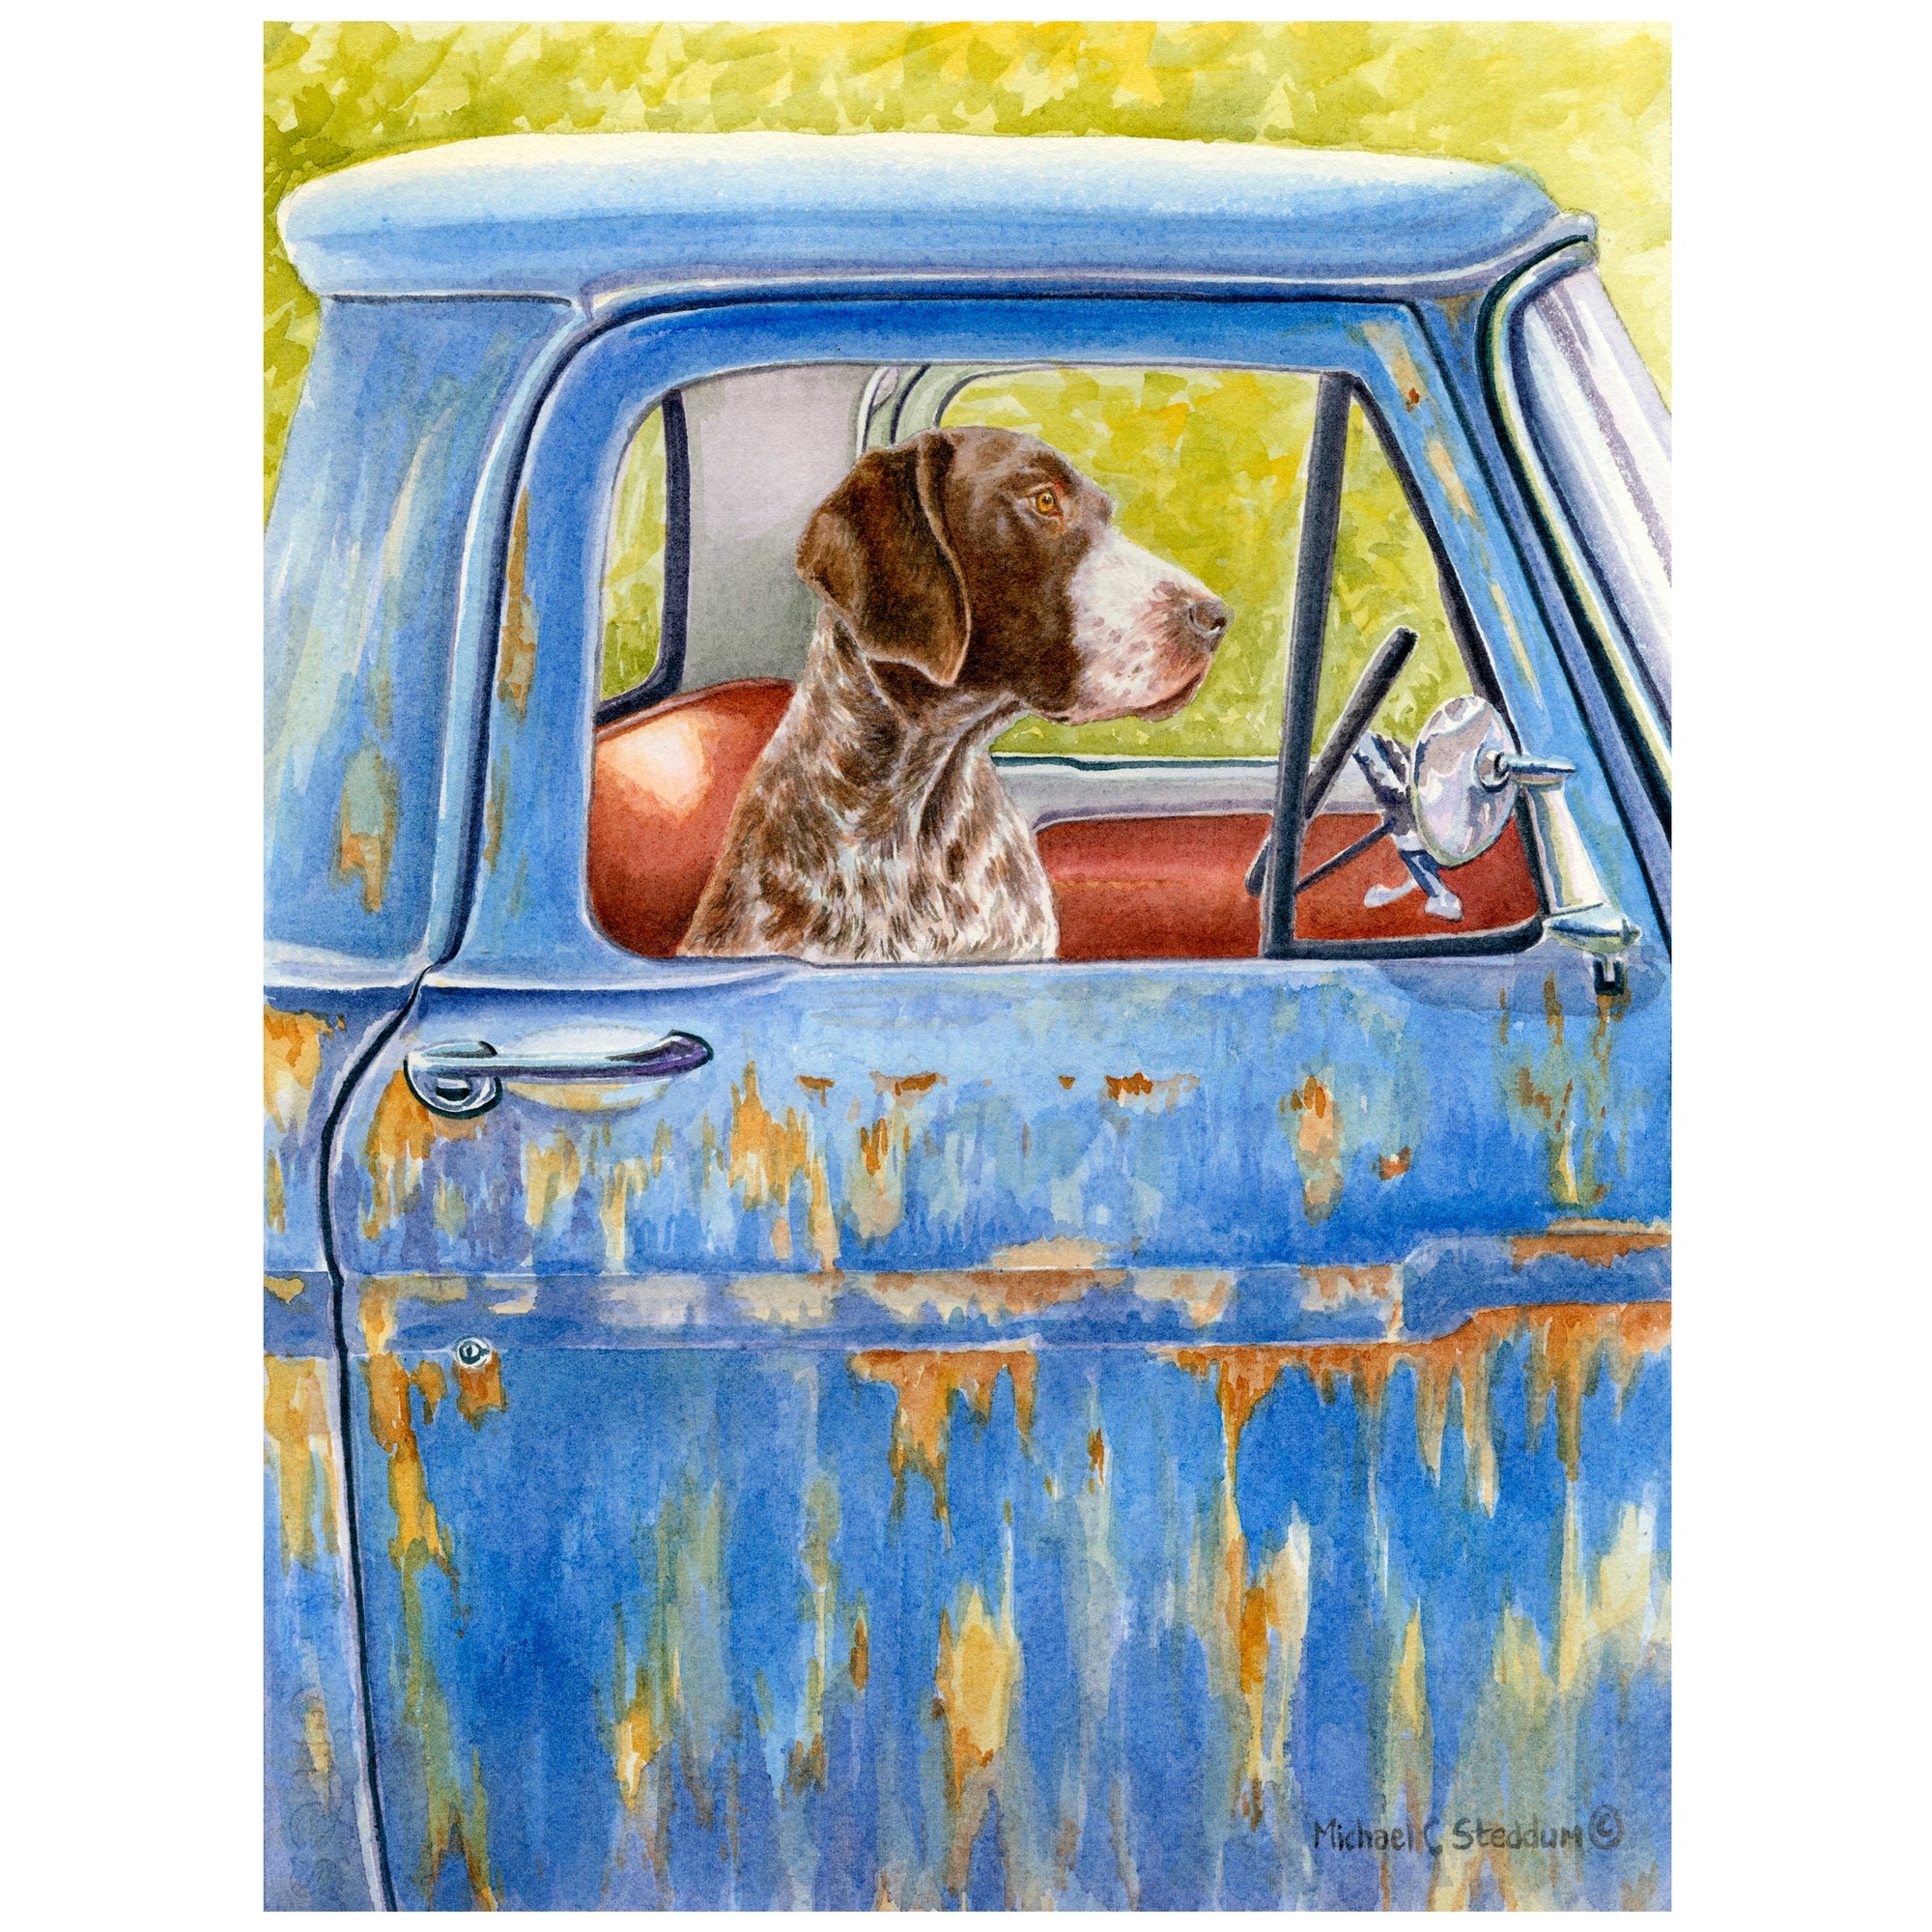 German Shorthaired Pointer Art Reproduction Print – “Anticipation” by Michael Steddum - Limited Edition Signed and Numbered German Shorthair Pointer Art Print